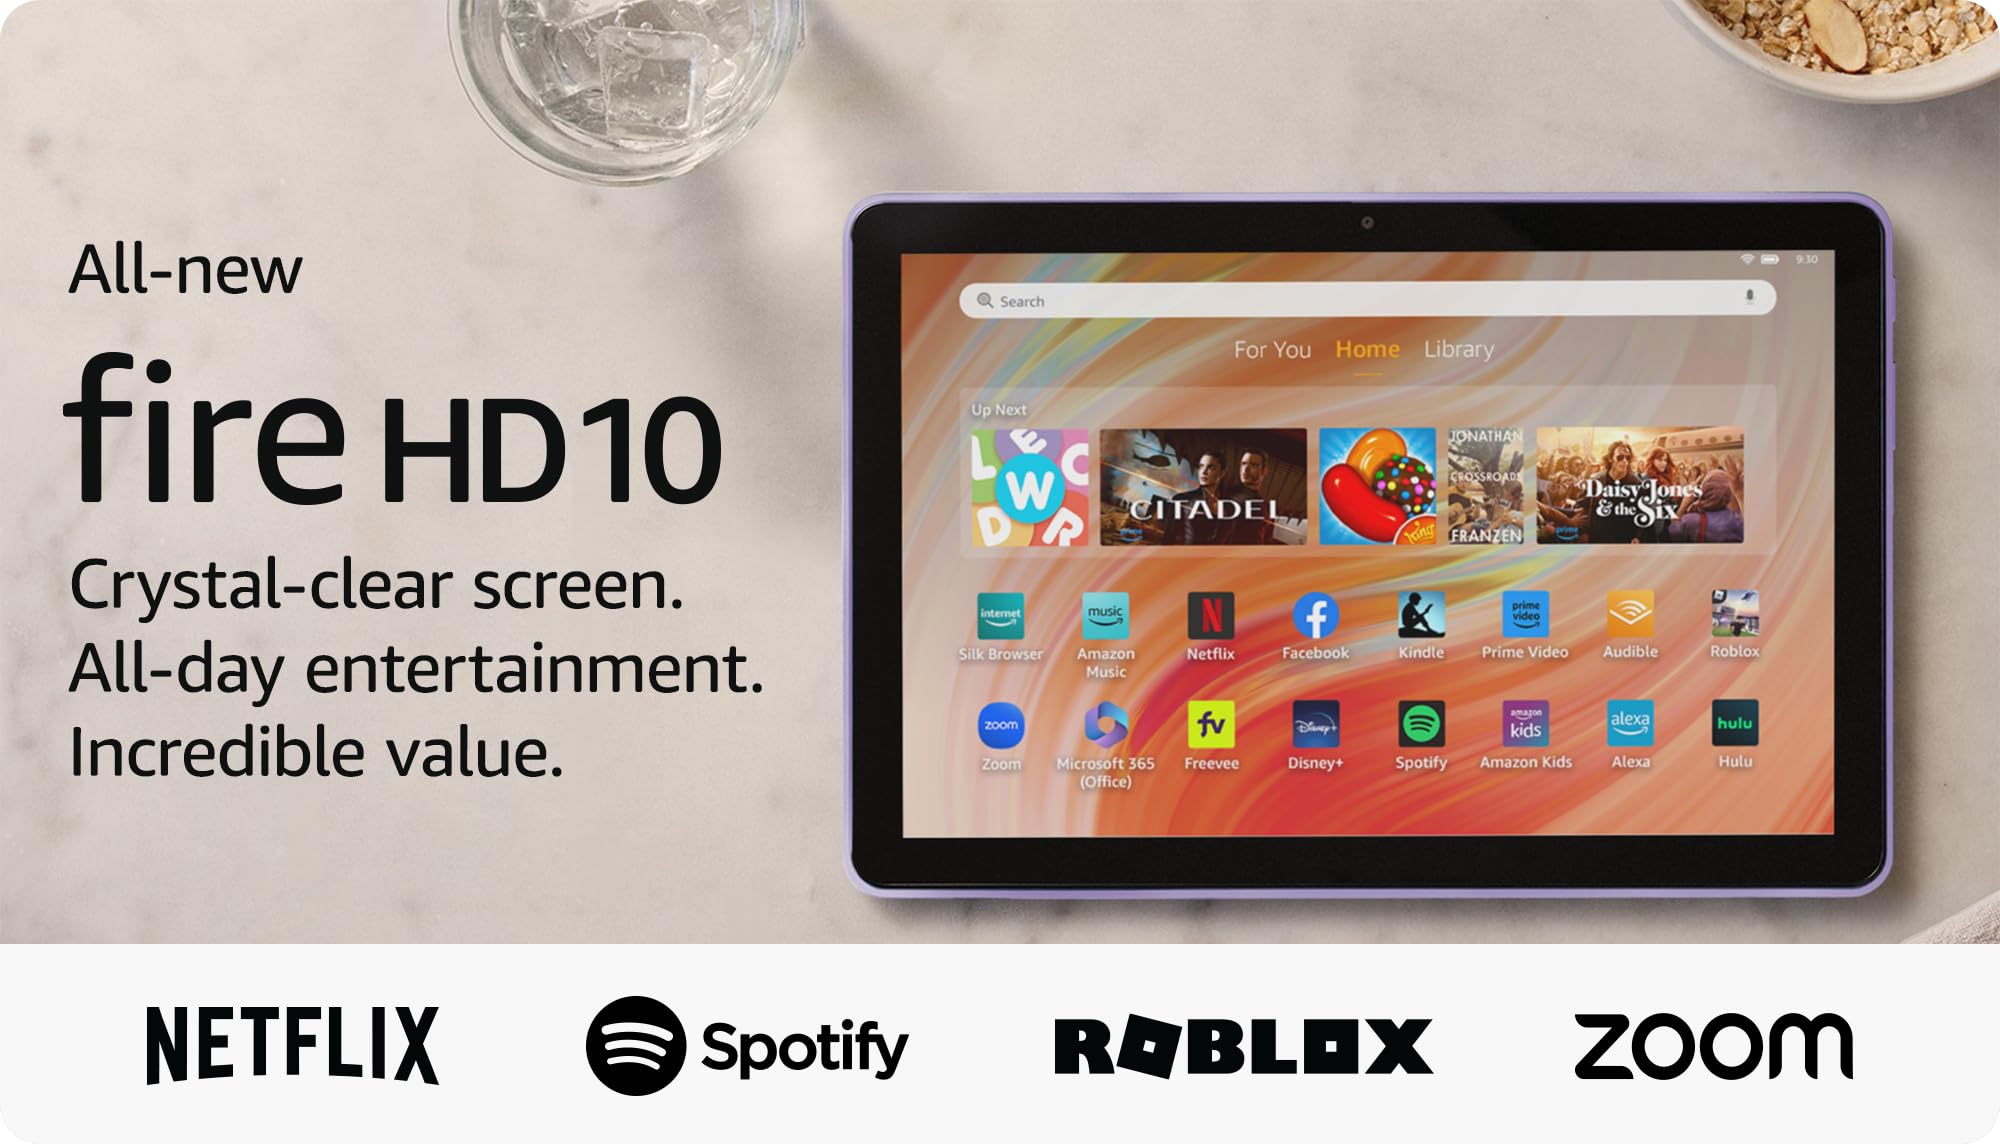 All-new Amazon Fire HD 10 tablet, vivid and light, 10.1